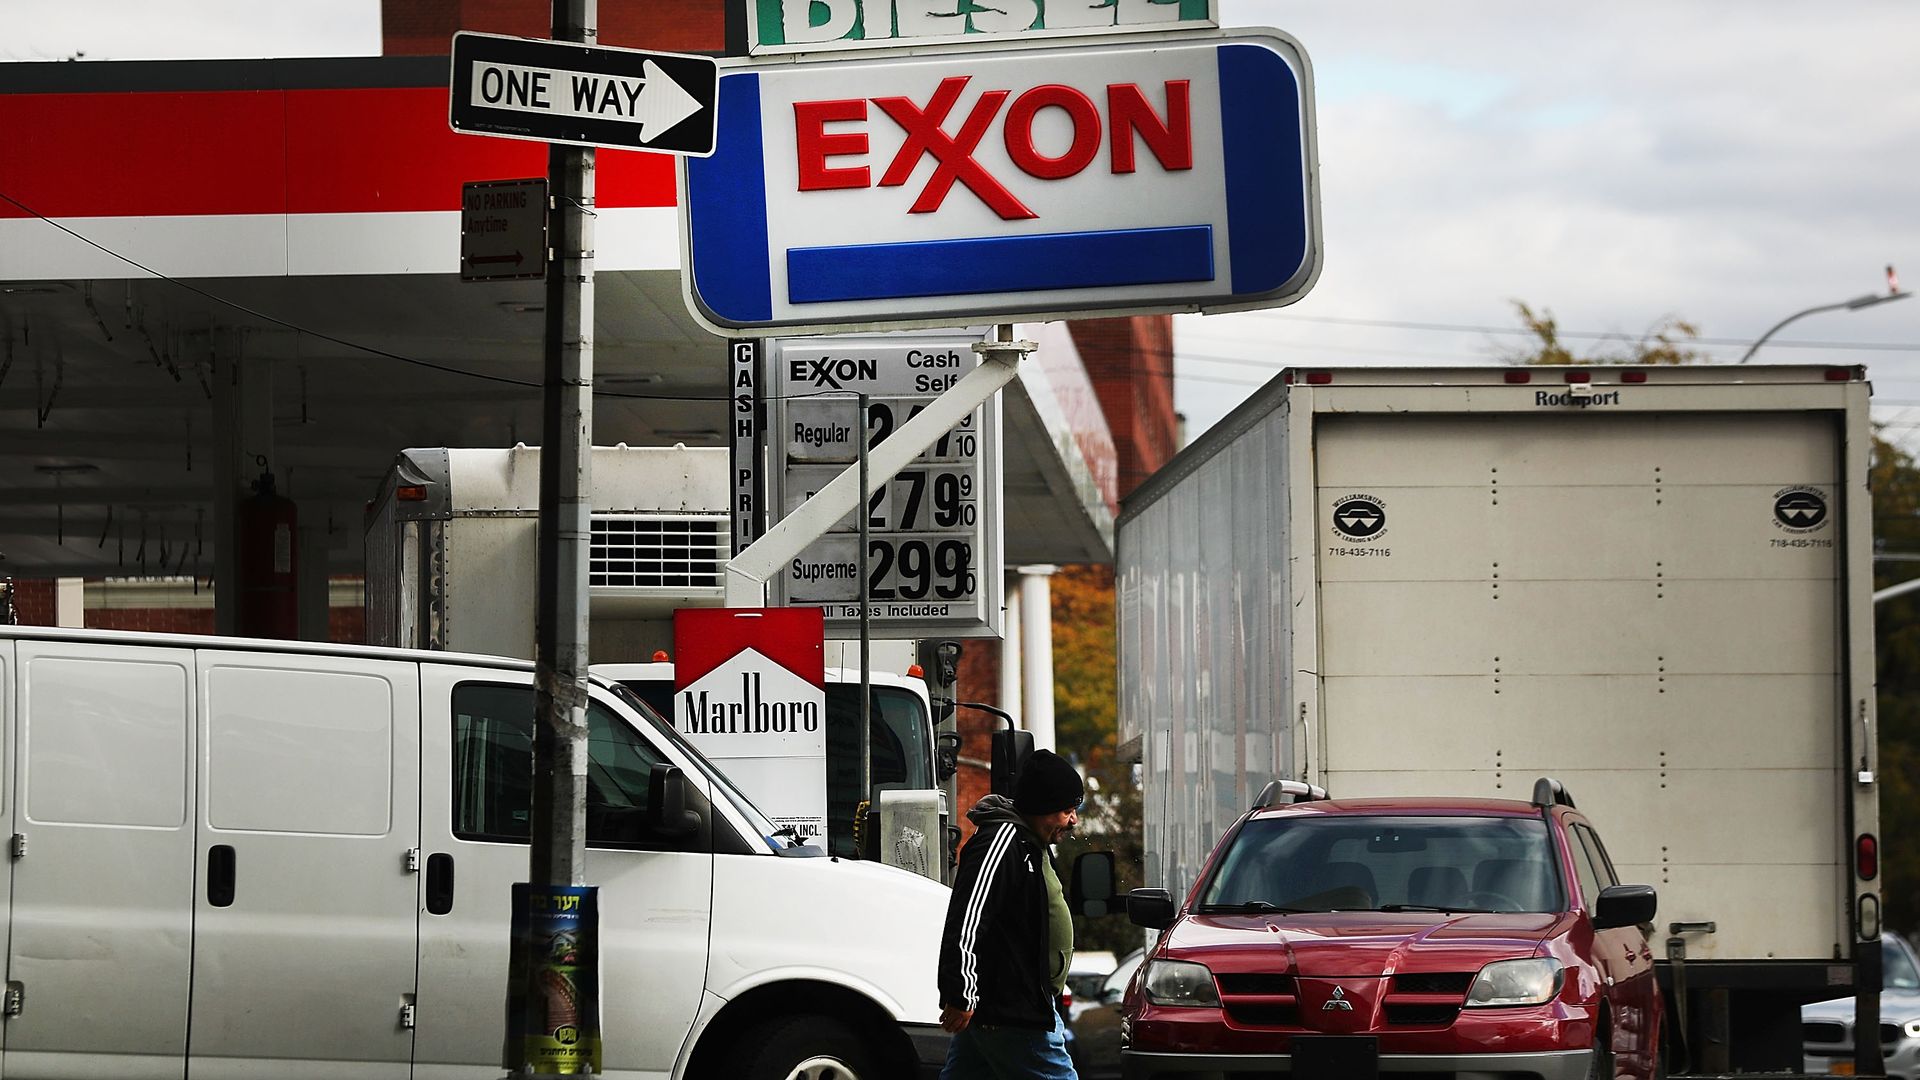 In this image, a man walks underneath an Exxon sign at a gas station.